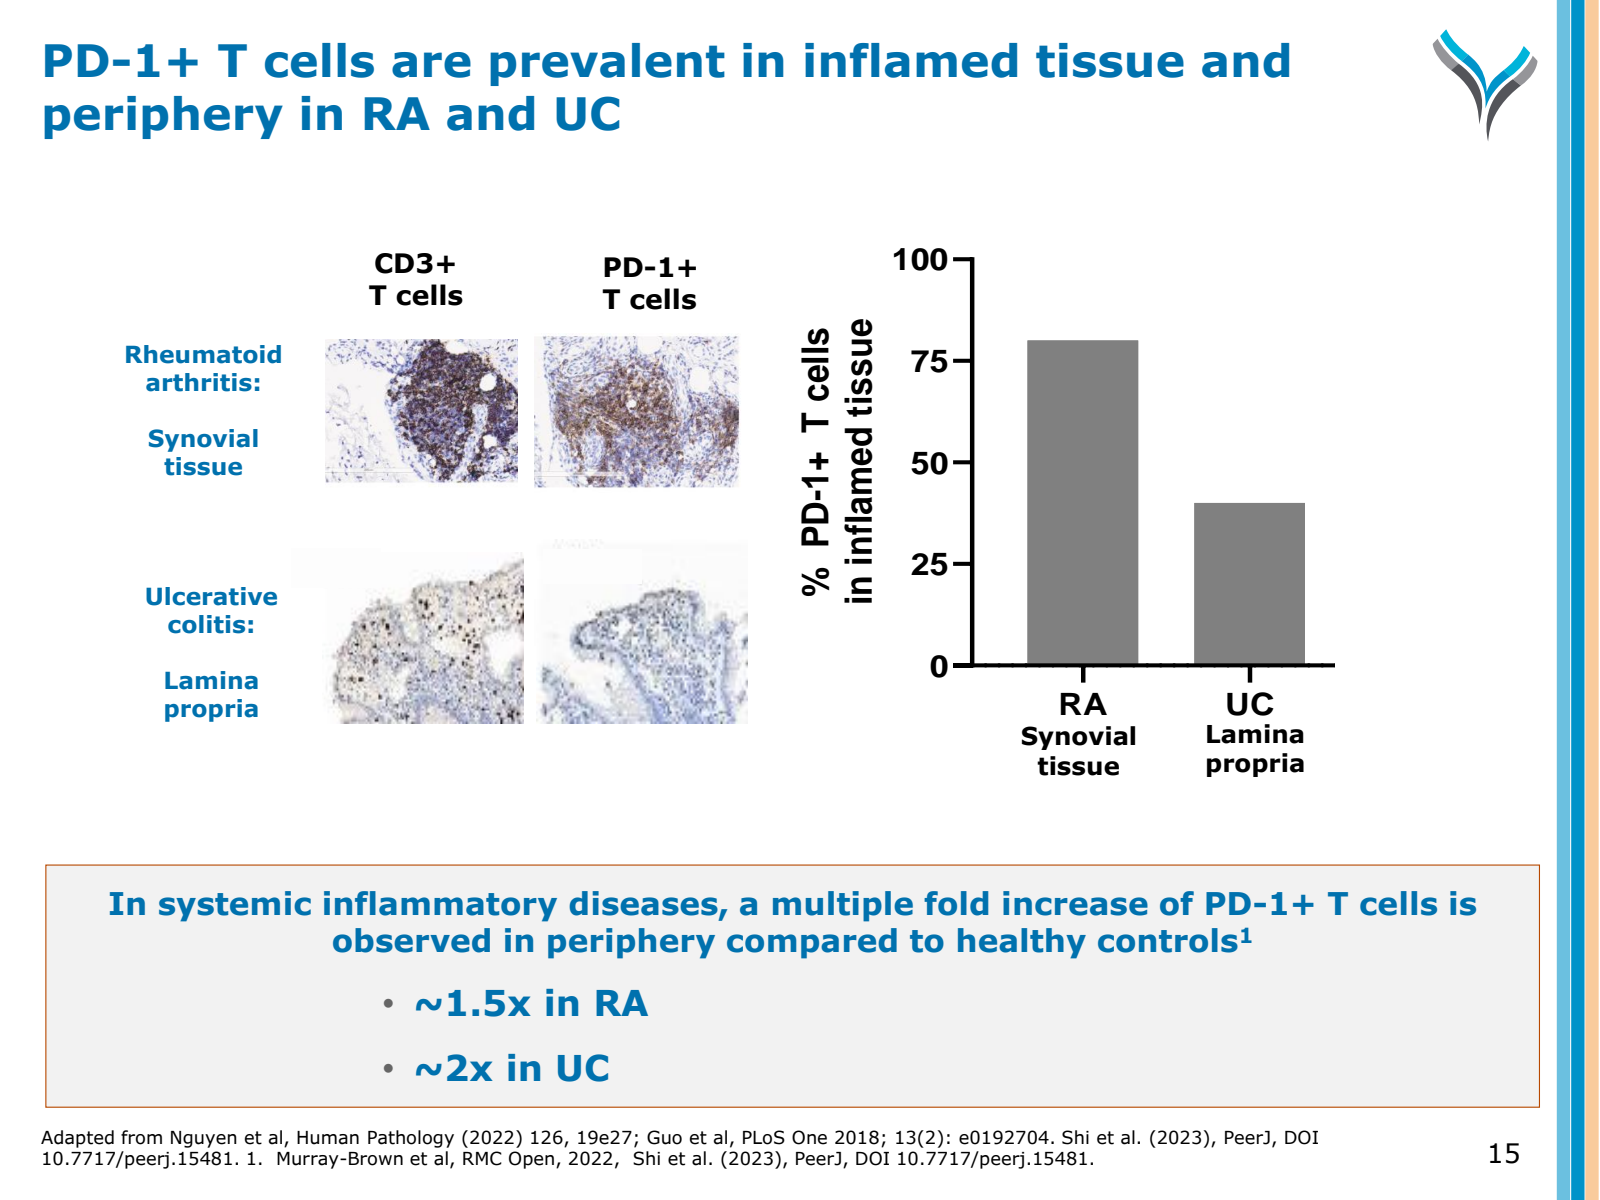 PD - 1 + T cells are